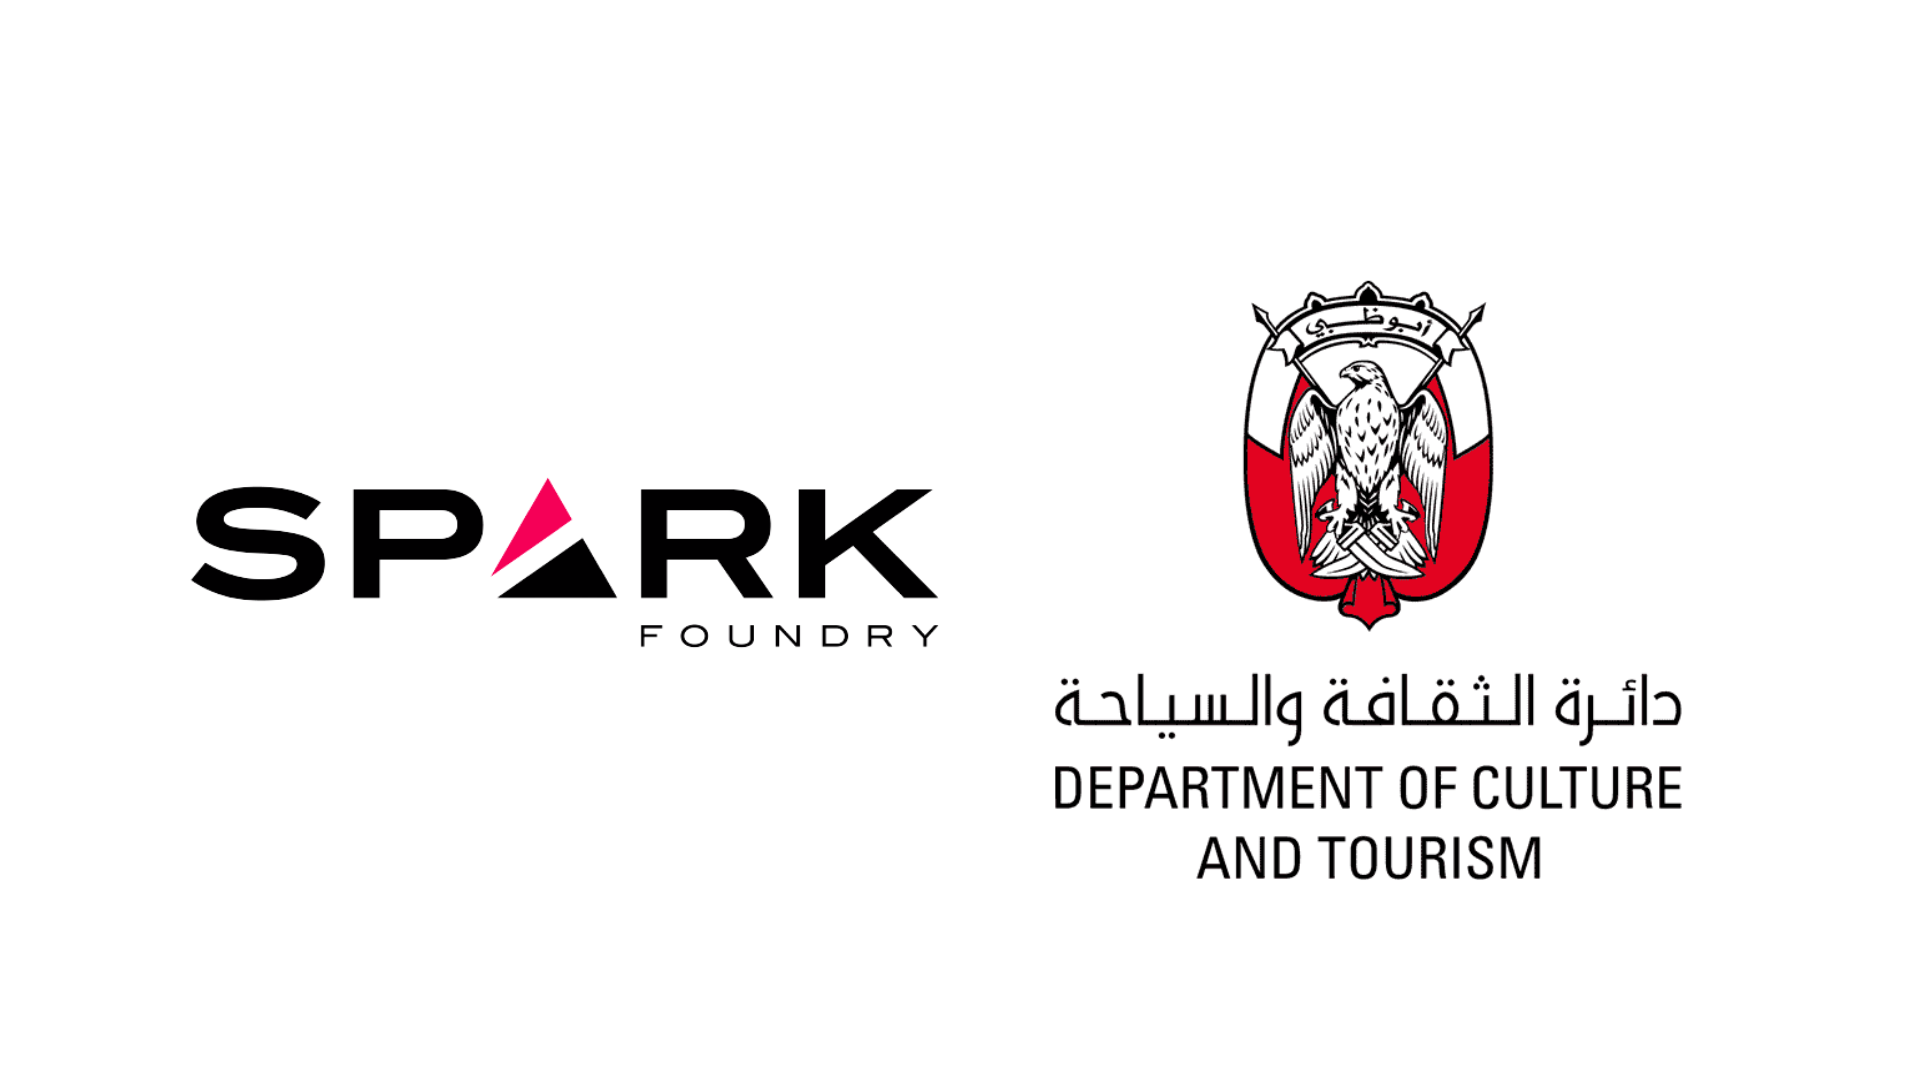 Department of Culture and Tourism - Abu Dhabi Appoints Spark Foundry as Global Media and Buying Agency Partner